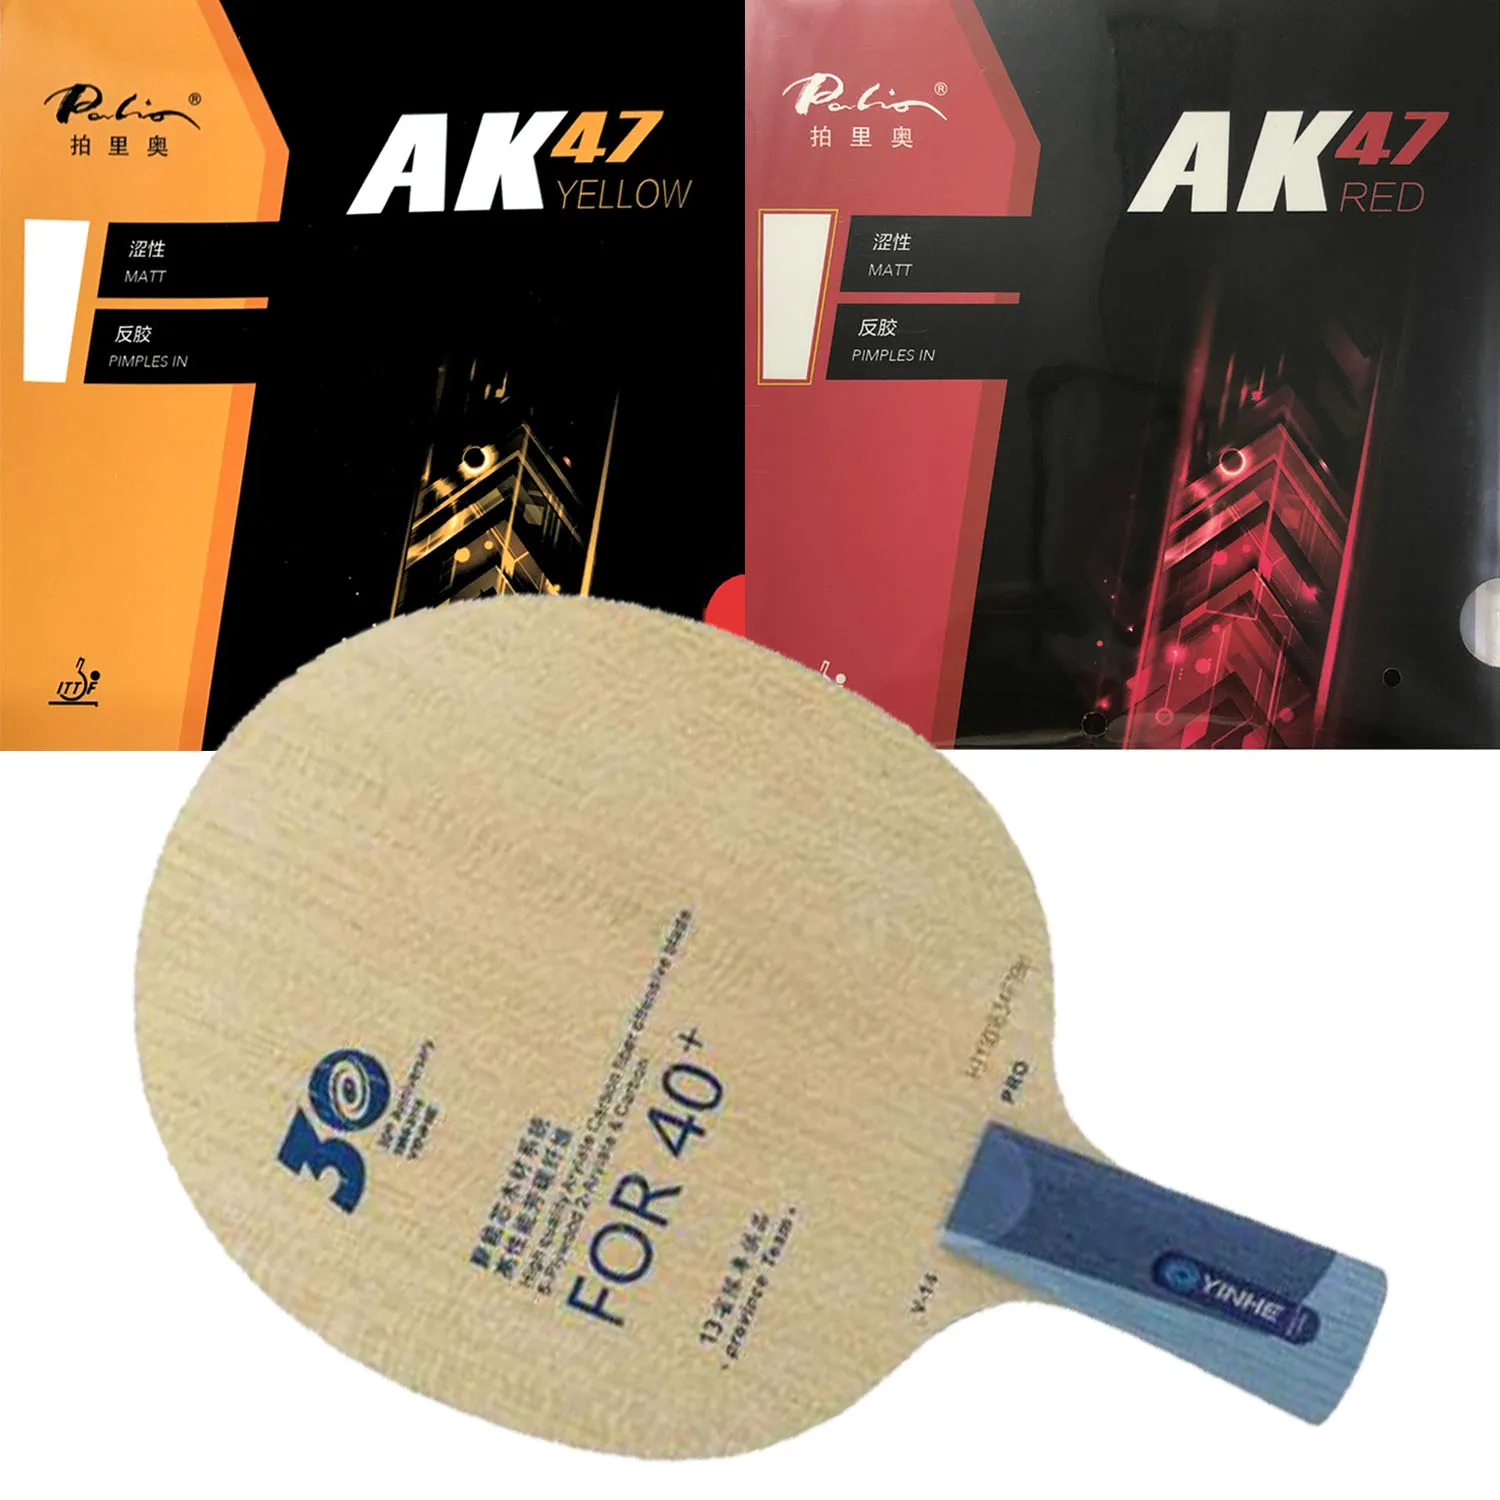 Pro Combo Racket Yinhe V-14 V14 pro table tennis Blade with Palio AK47 YELLOW and AK47 RED Matt Pips in PingPong Rubber